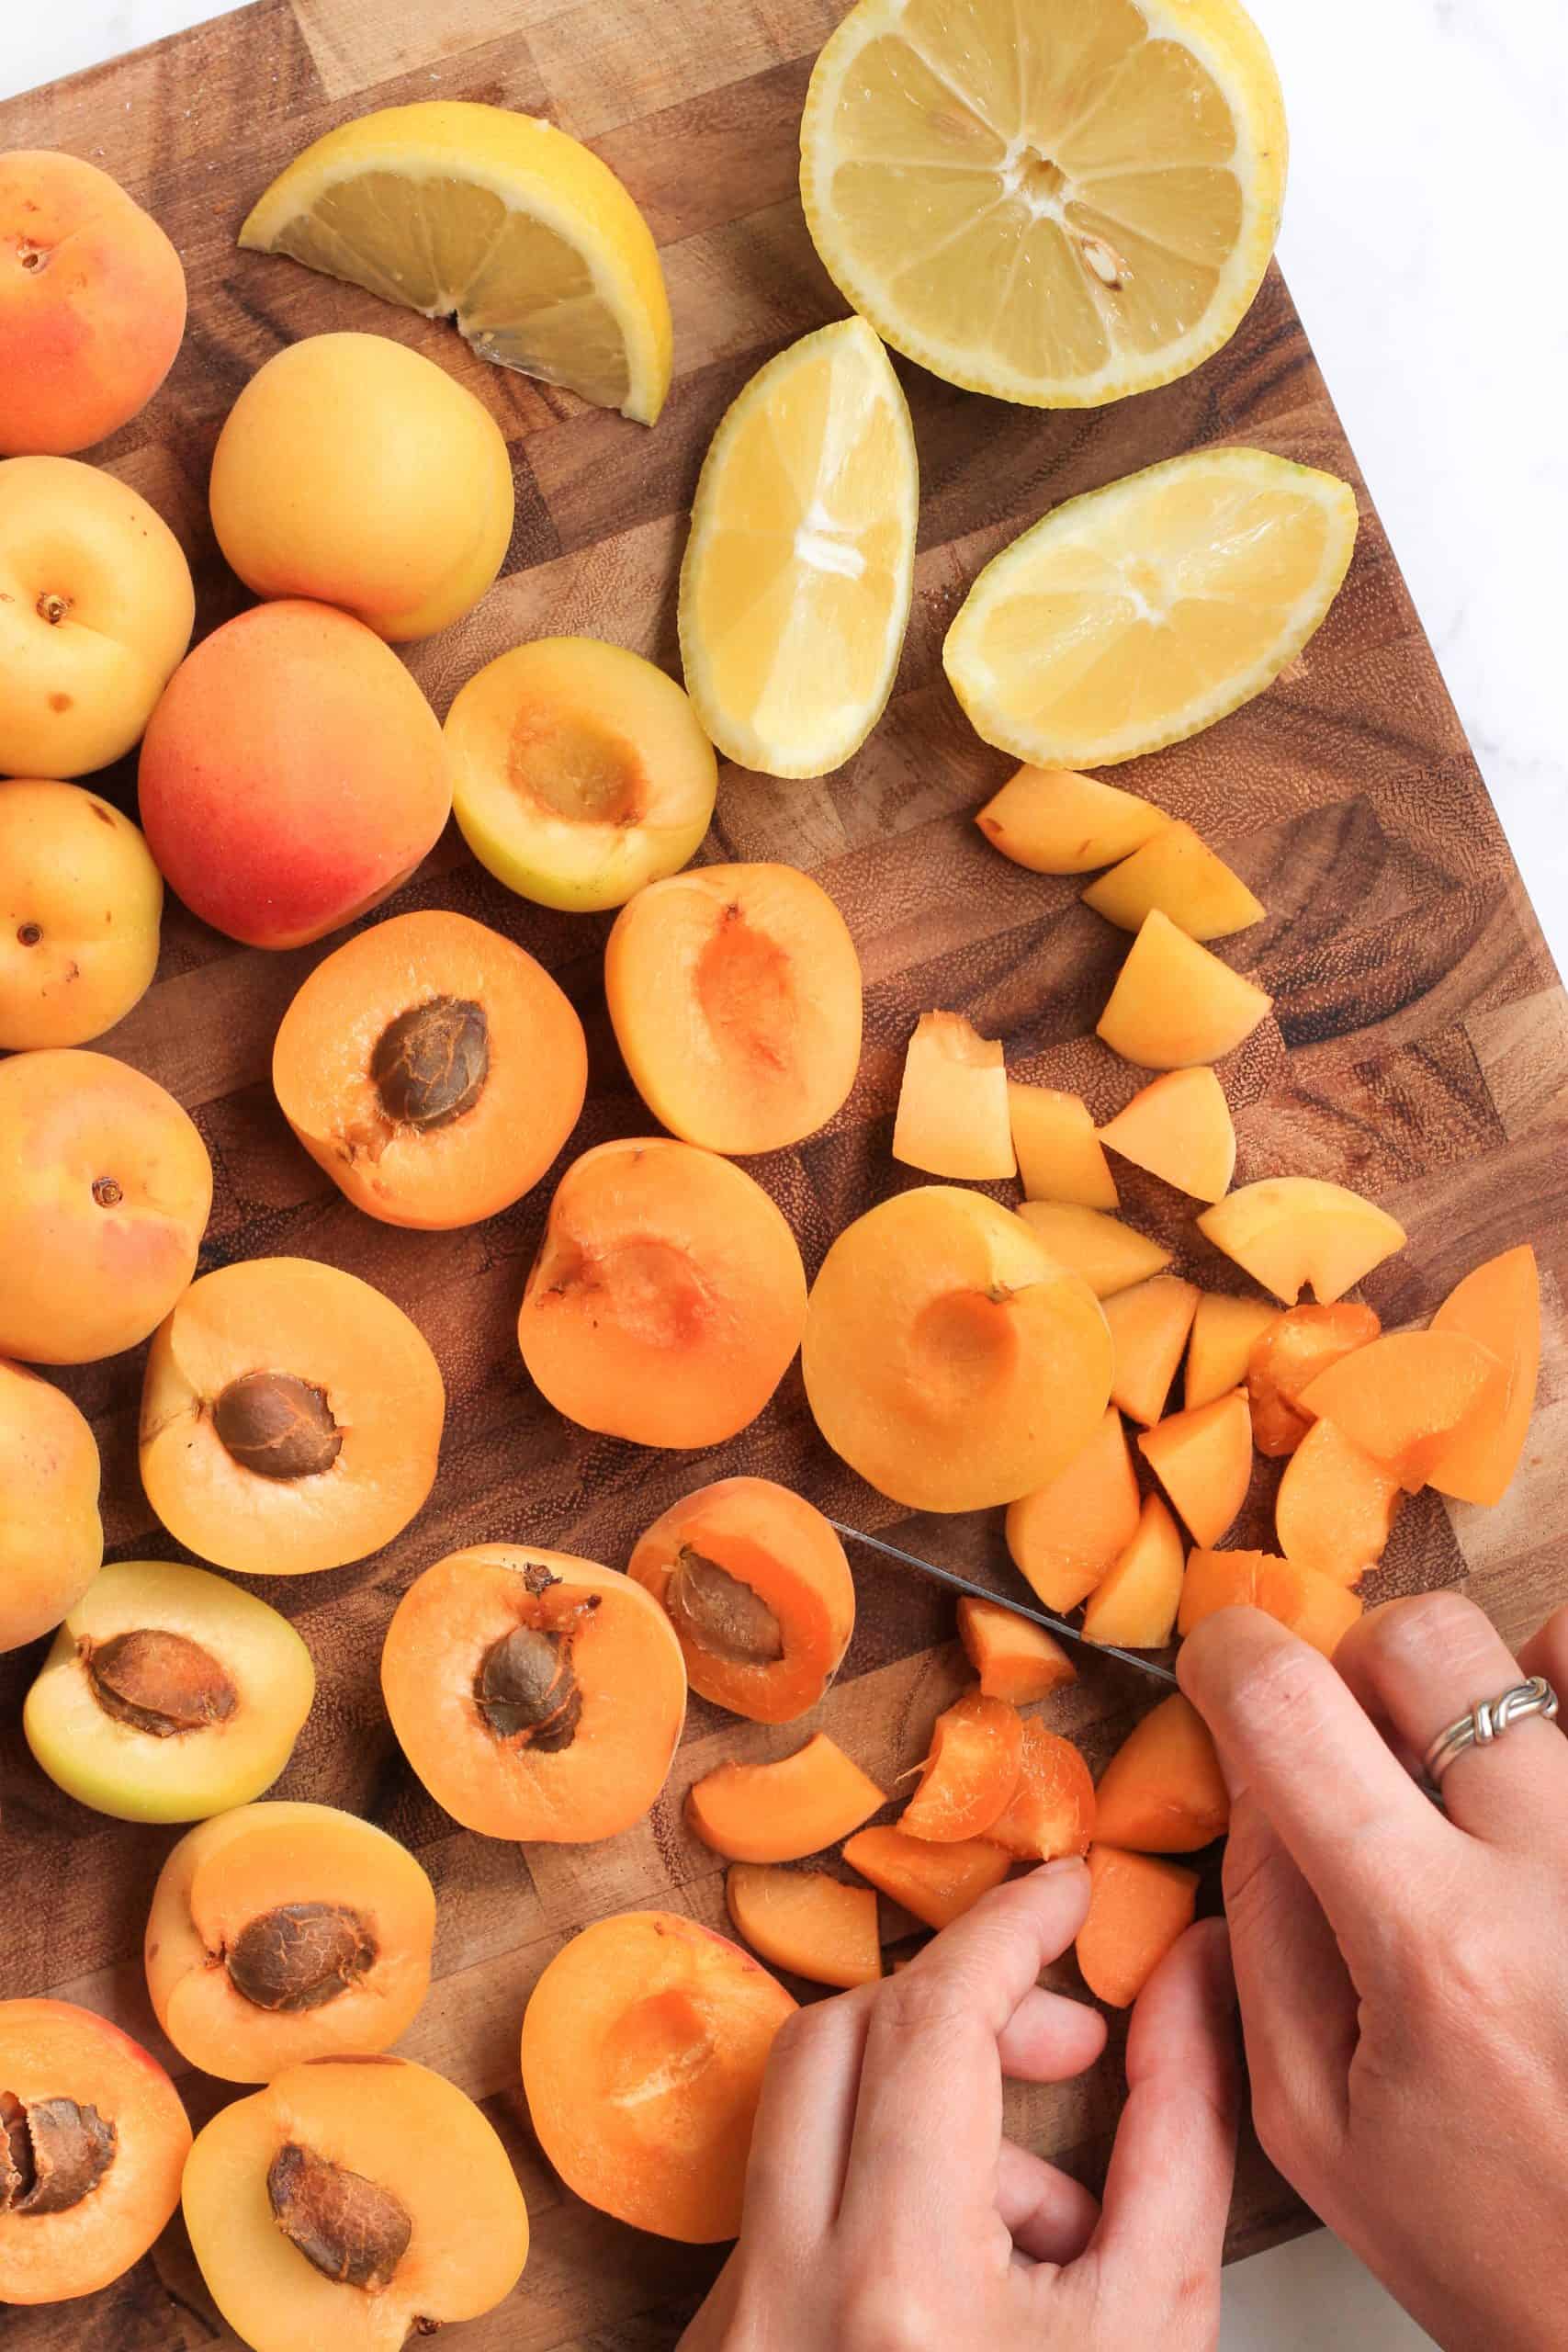 Slicing apricots into small pieces on a wooden board.